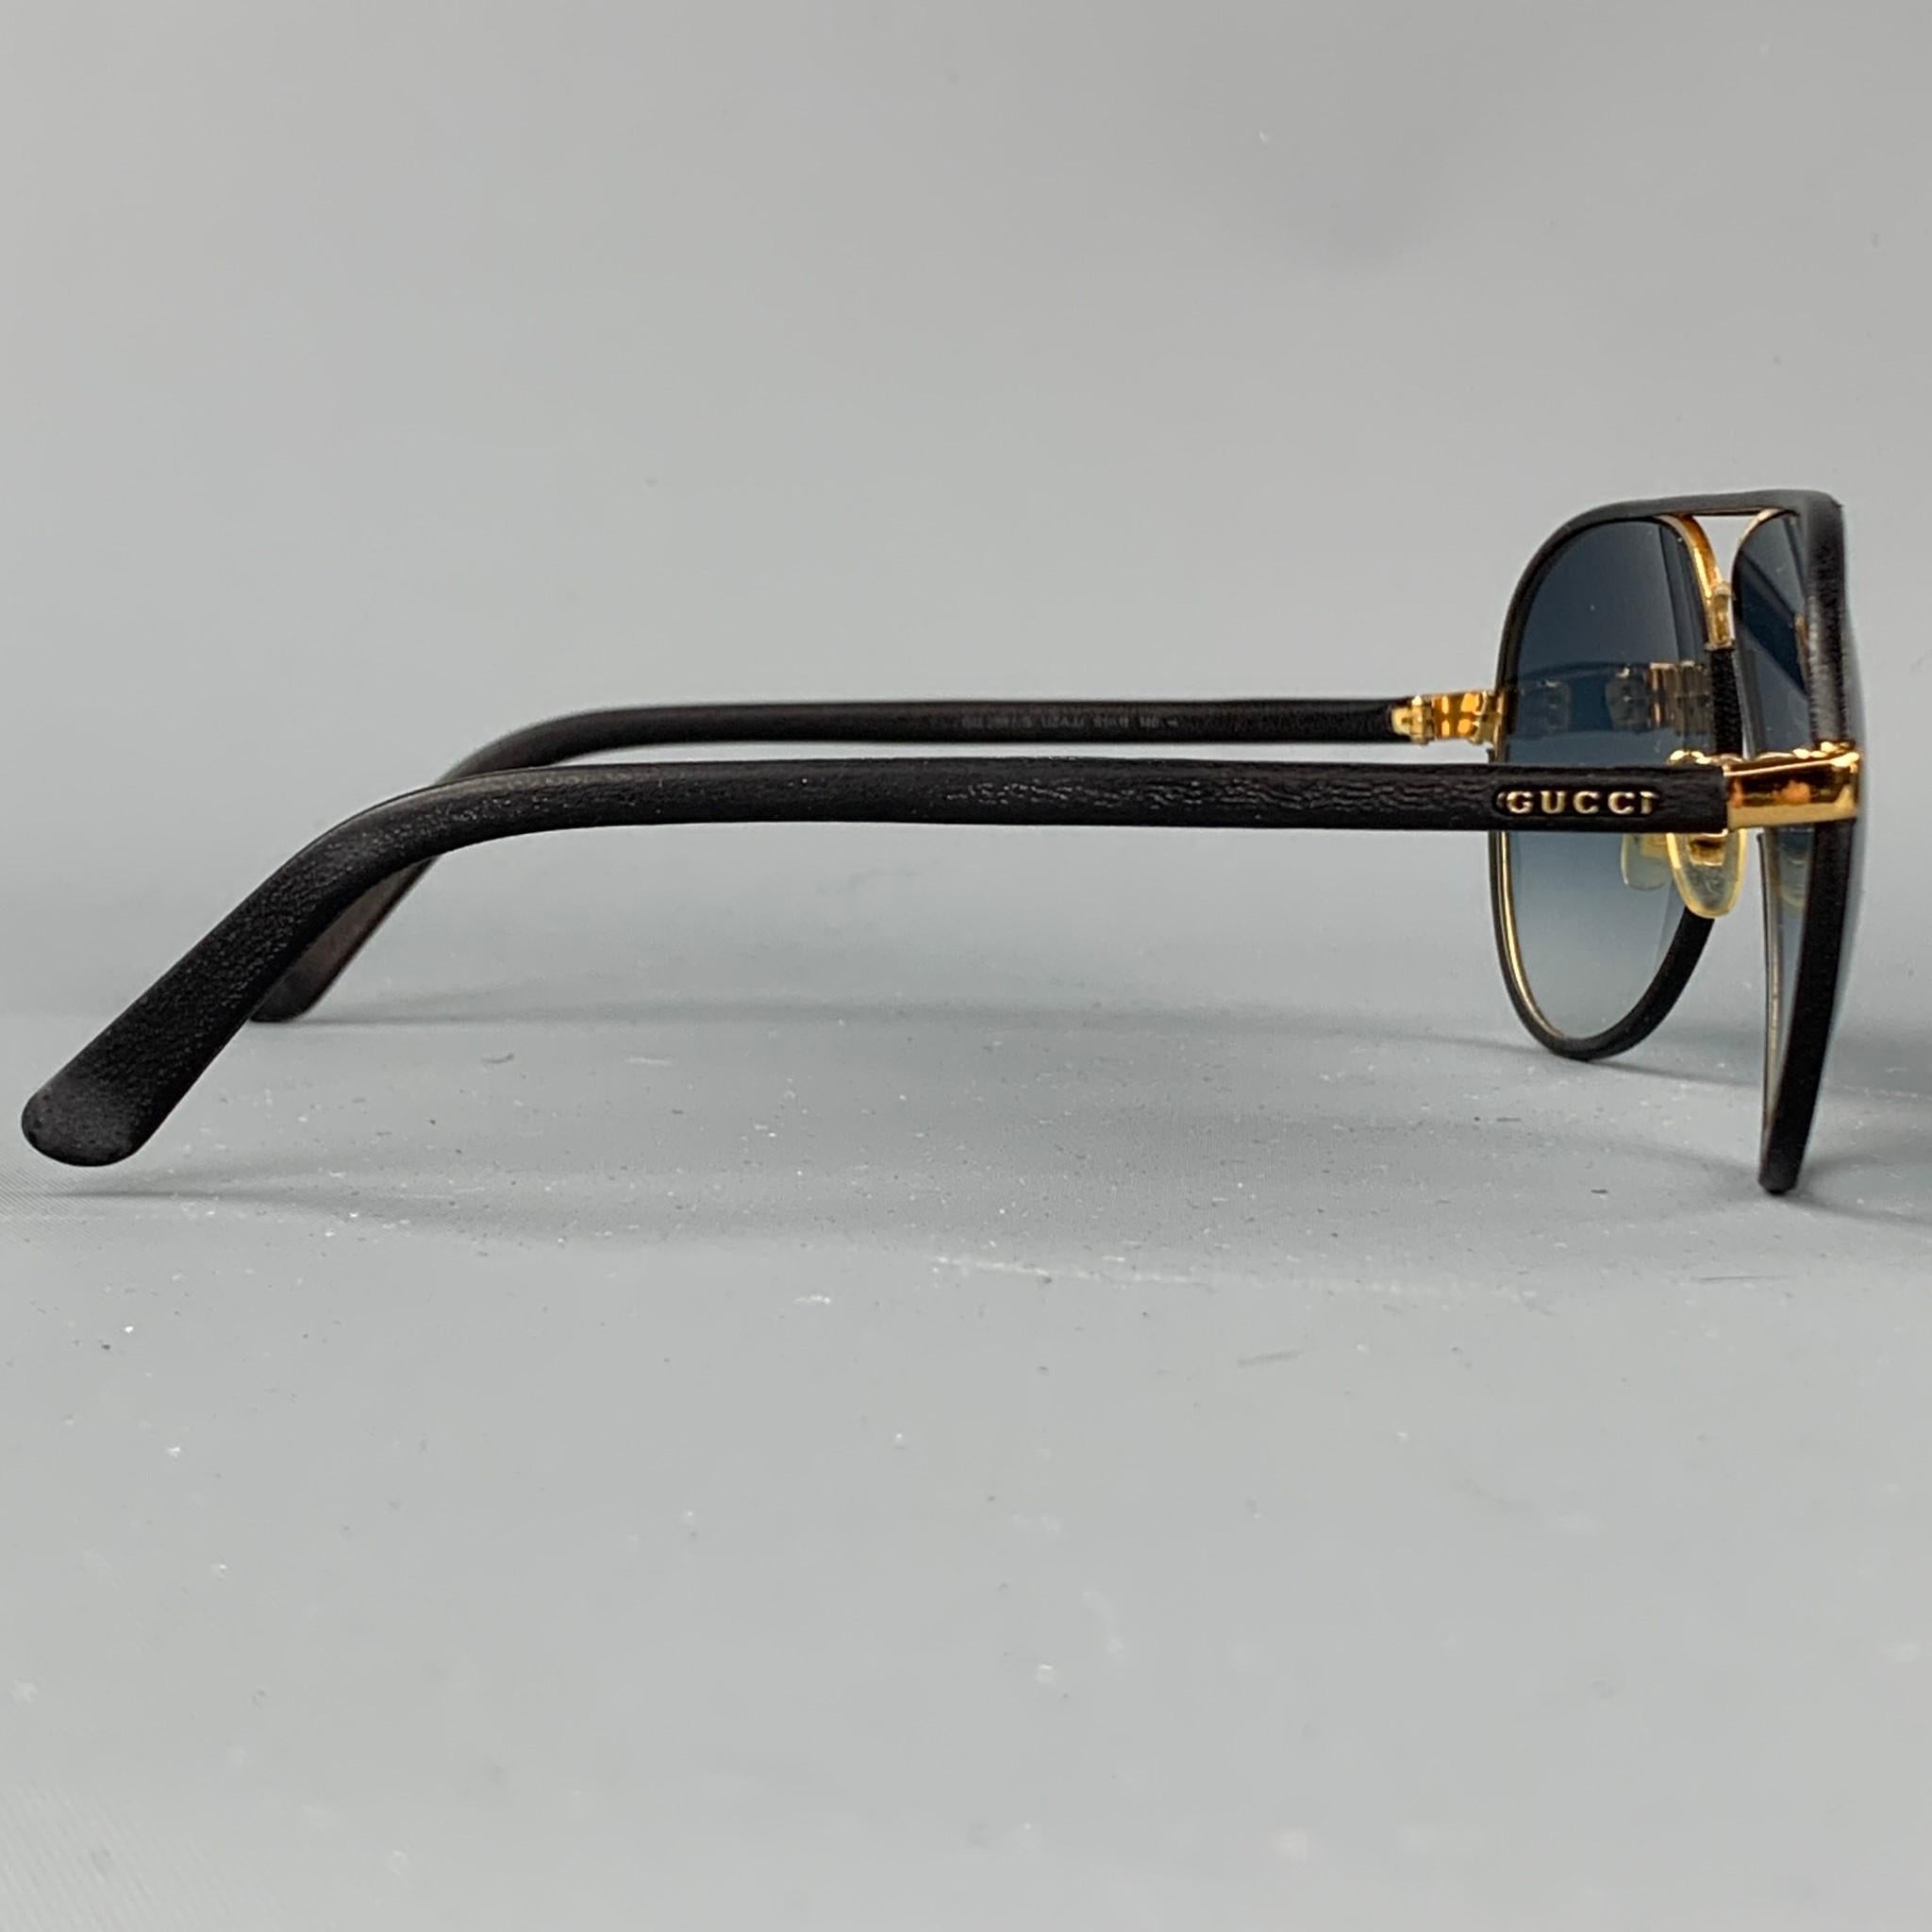 GUCCI sunglasses comes in a black leather with gold tone hardware featuring a aviator style and tinted lenses. Comes with case. Moderate wear. Made in Italy. 

Very Good Pre-Owned Condition.
Marked: GG 2887/S UZAJJ 61-11 140

Measurements:

Length: